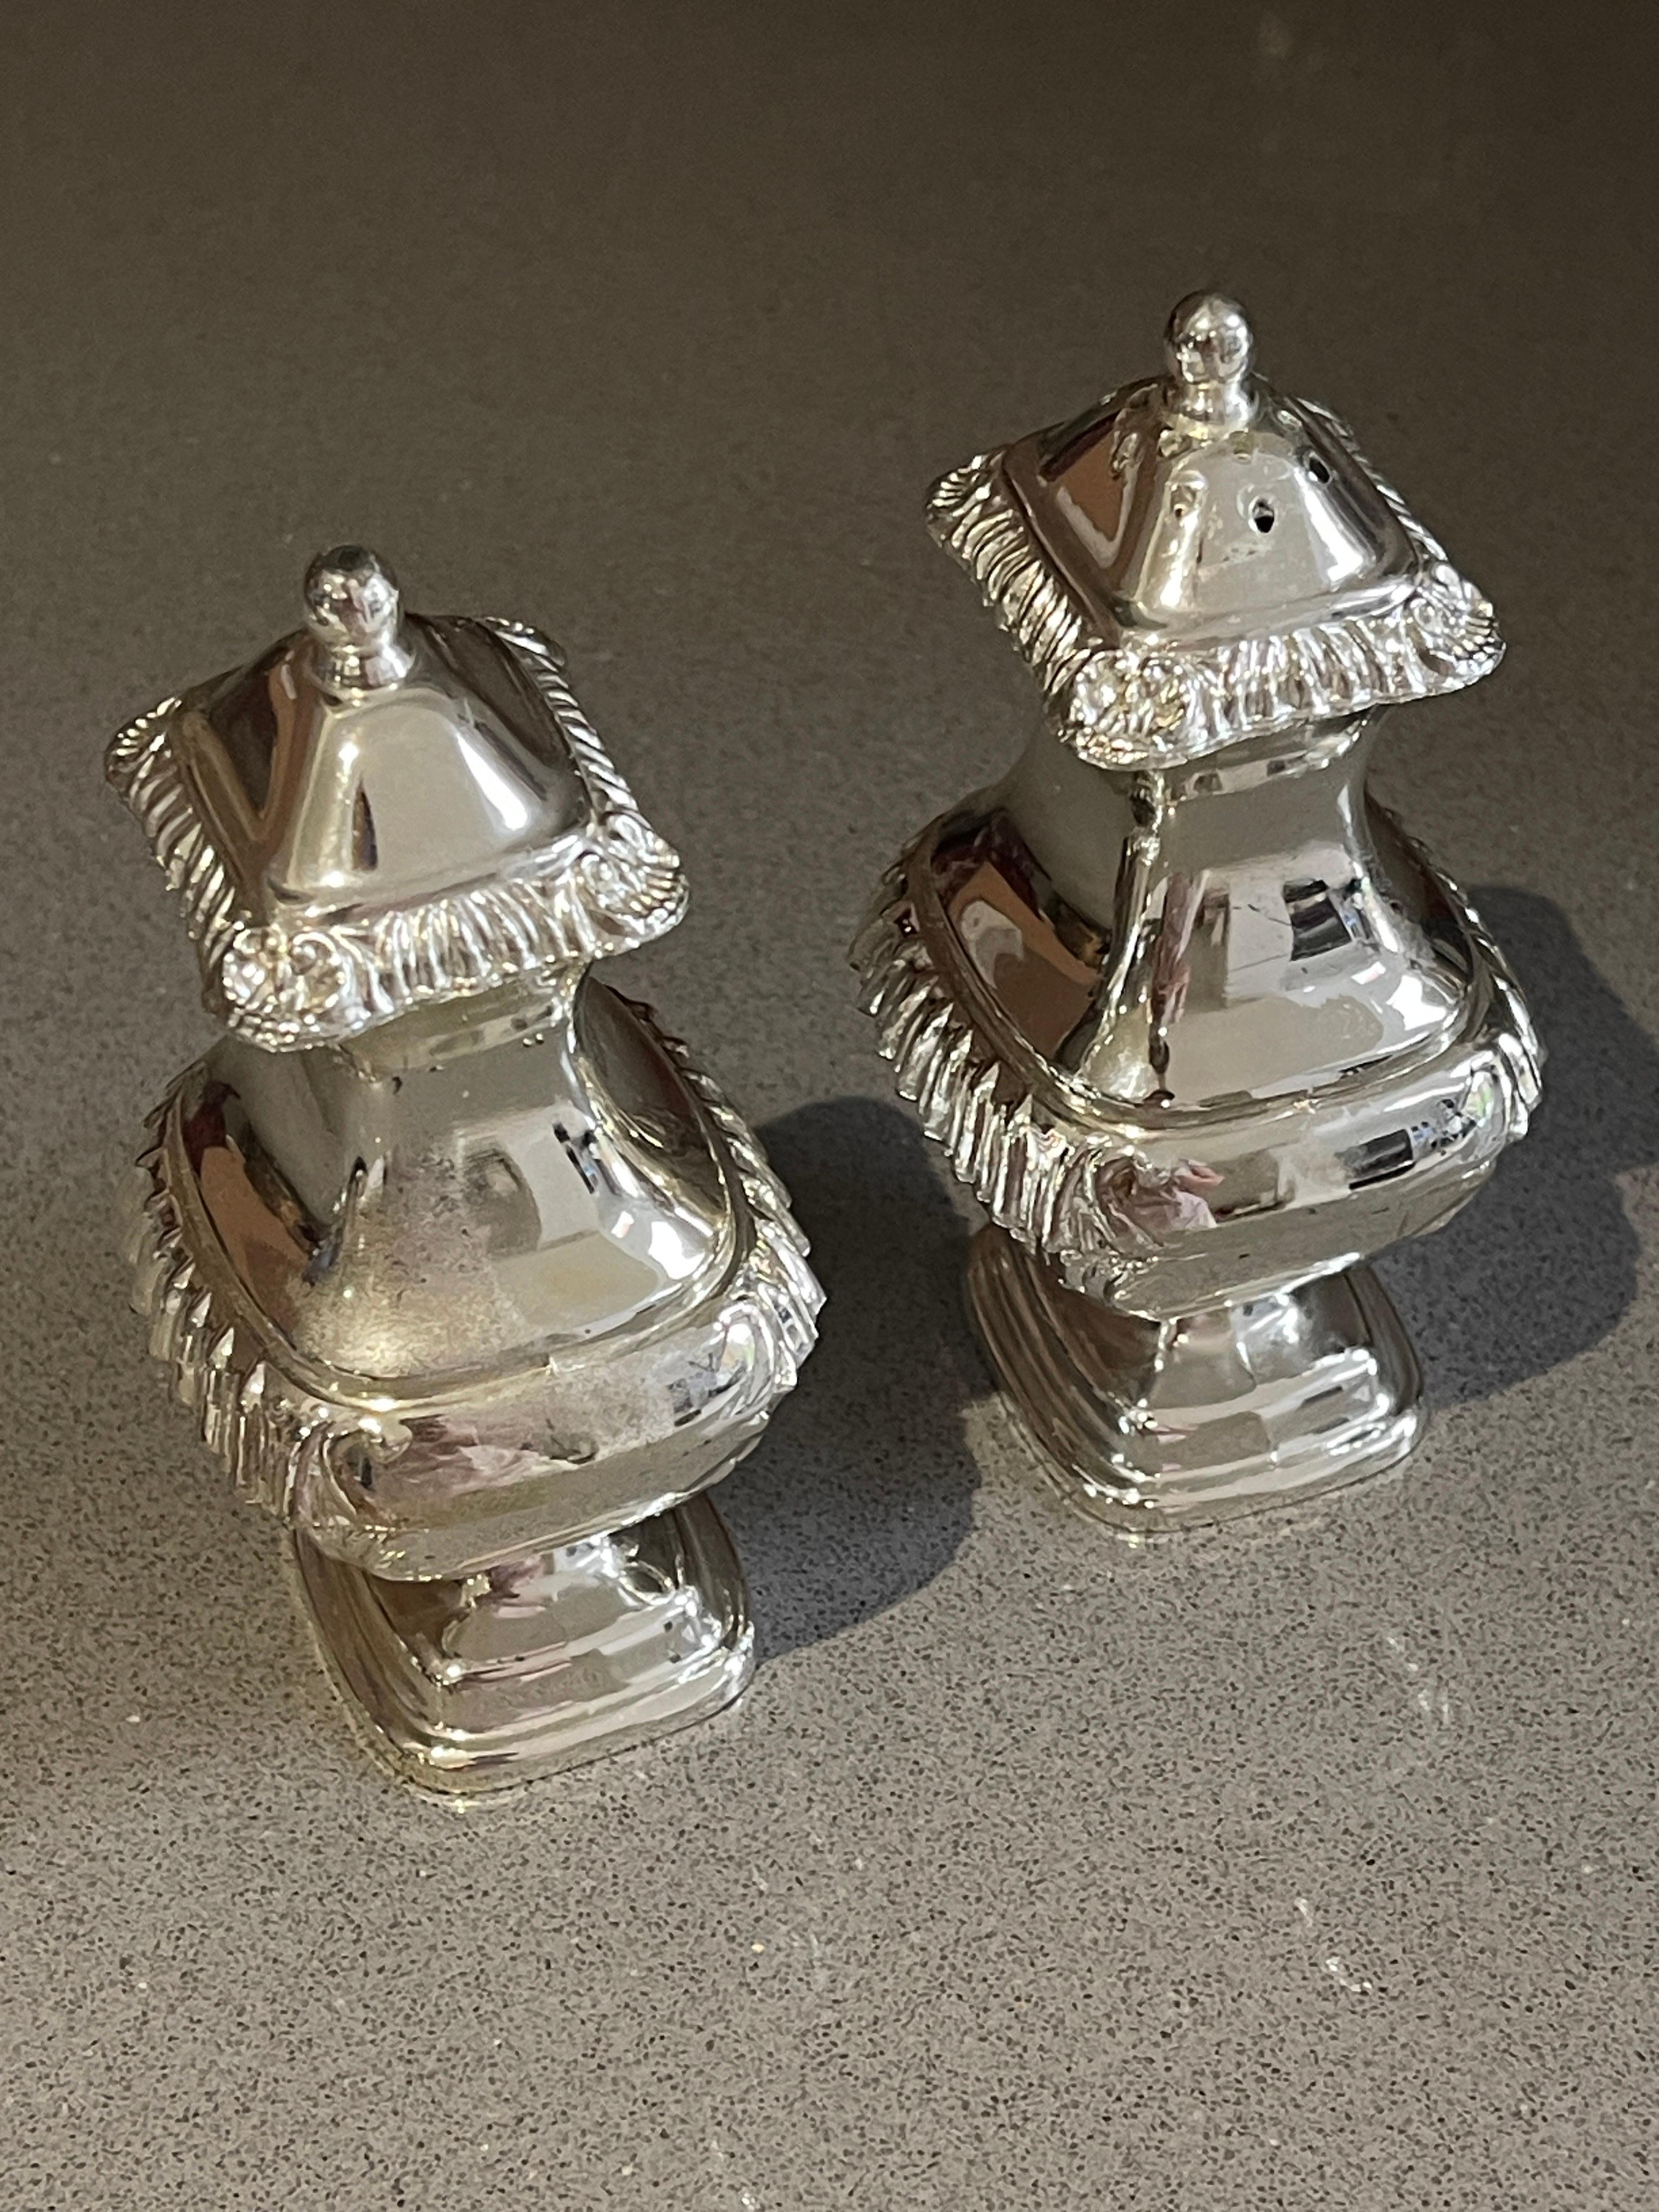 Antique valuable silver salt and pepper shaker or Decorative tableware pressed, cast and chased. Oval, domed body on short, curve  All-encompassing C-curves in relief, latticework, rocailles, tendrils of flowers and matching cartouches.
Highly